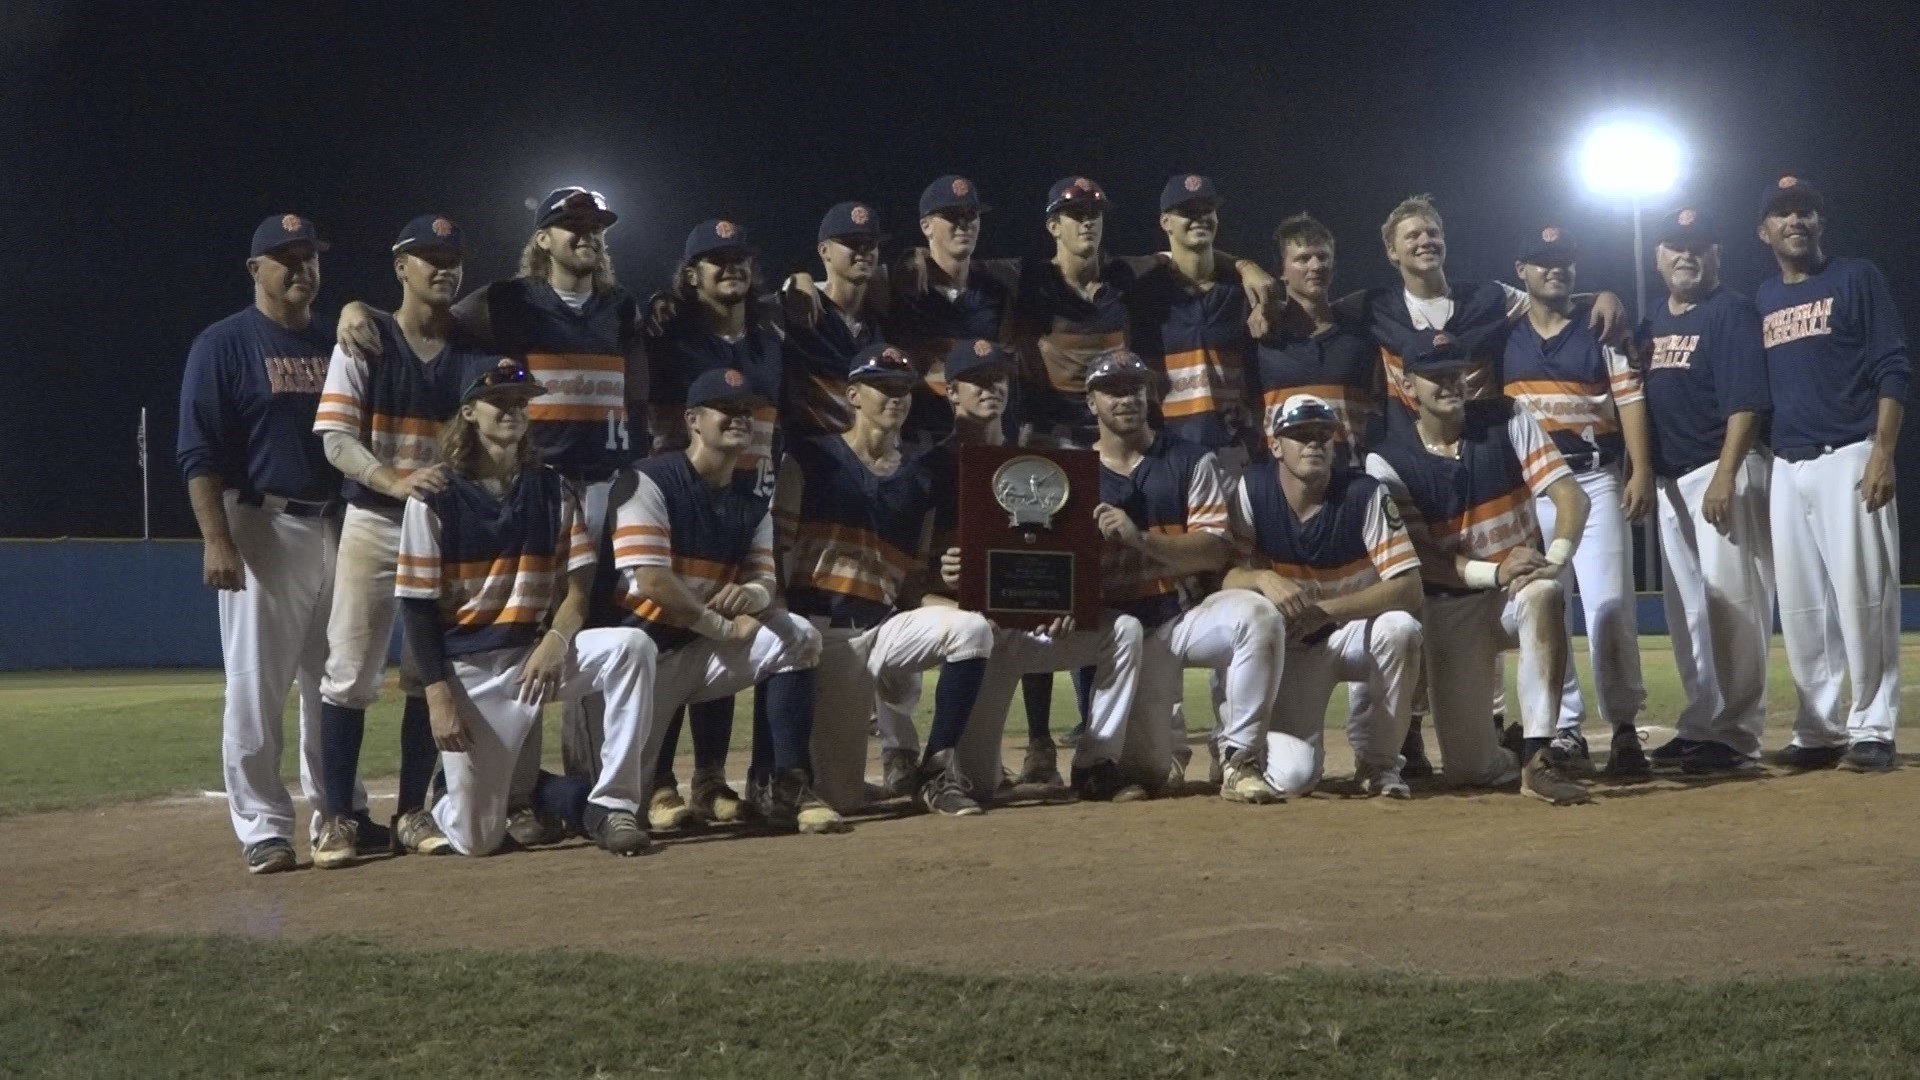 The Sportsman defeated Russellville, 4-2 in the title game after the Pirates run-ruled Sheridan, 17-1, in the semifinal